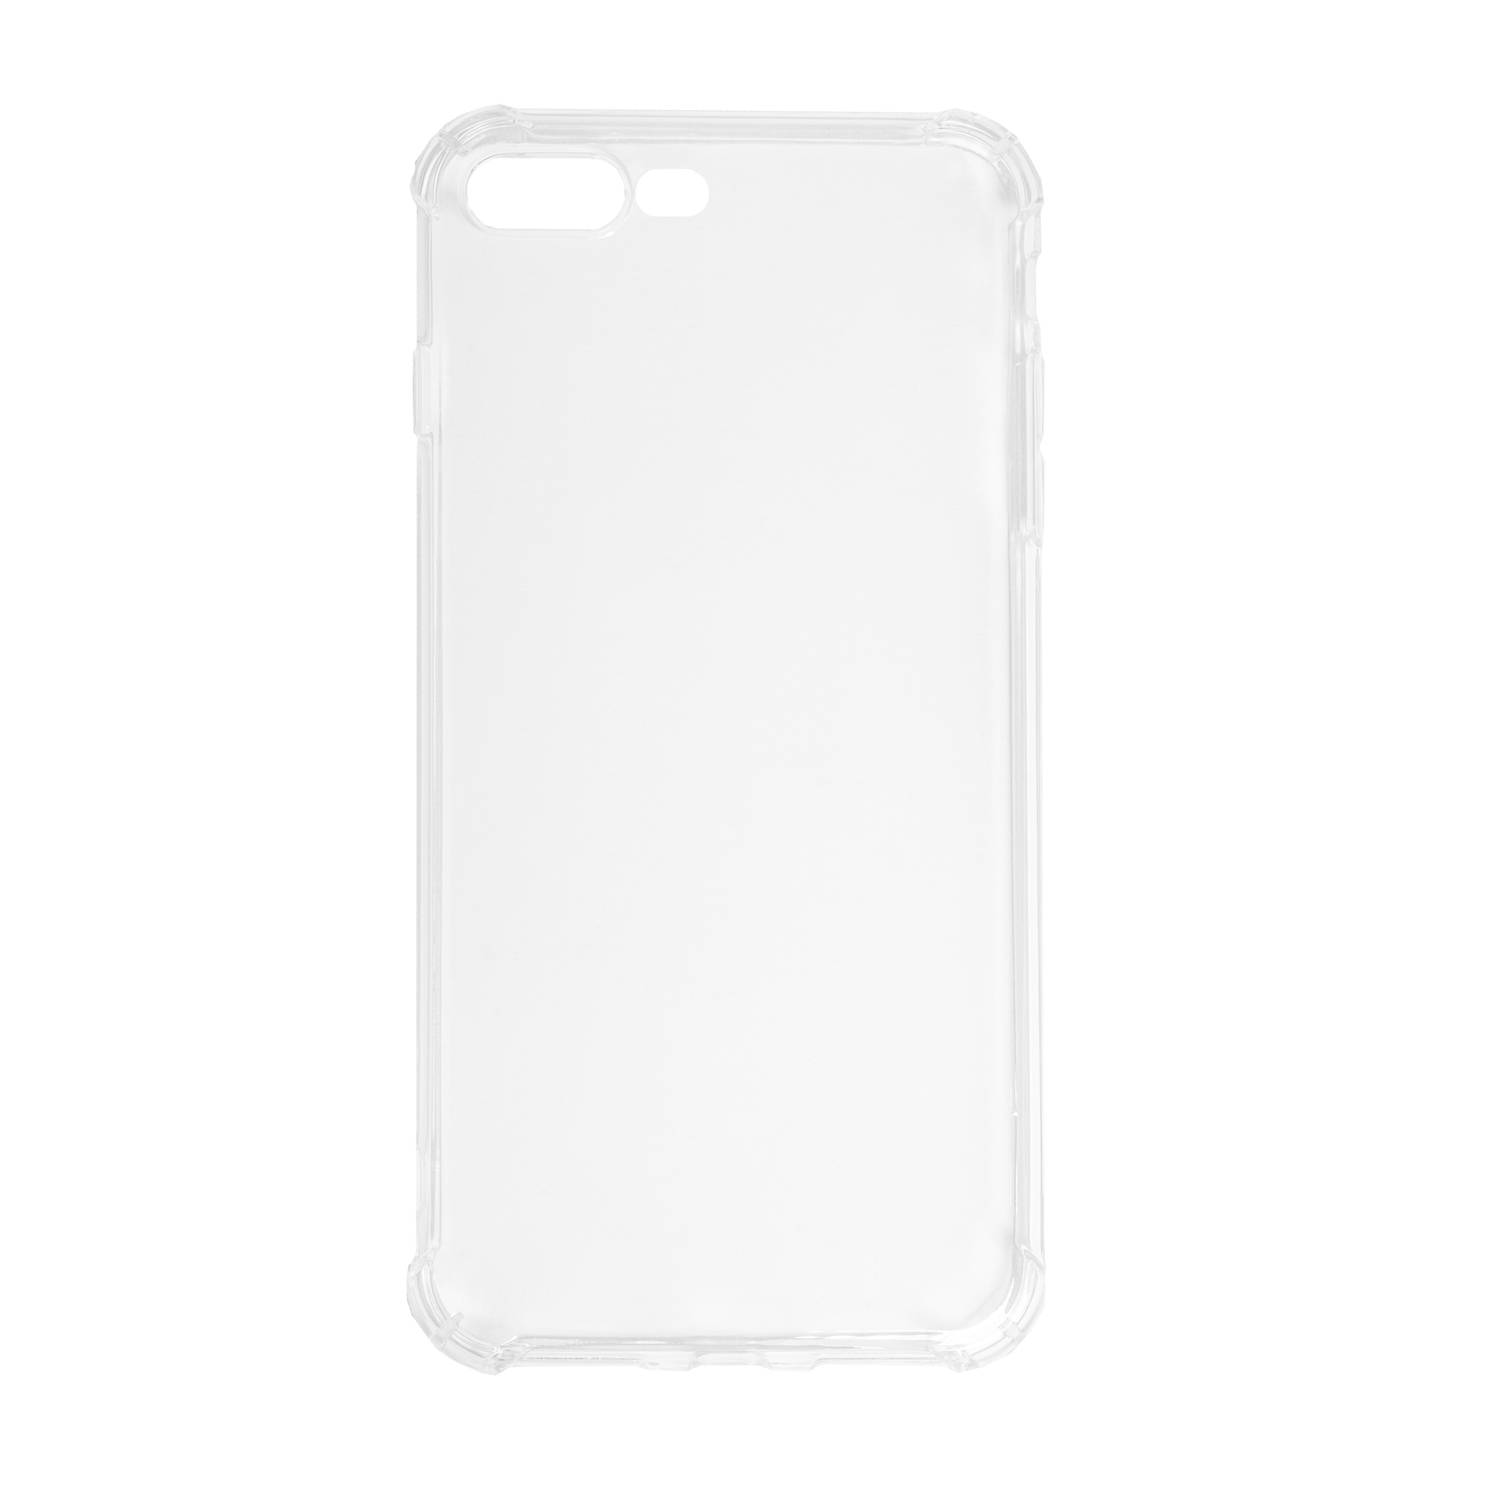 BMAX TPU soft case hoesje voor iPhone 7/8 Plus - Clear/Transparant